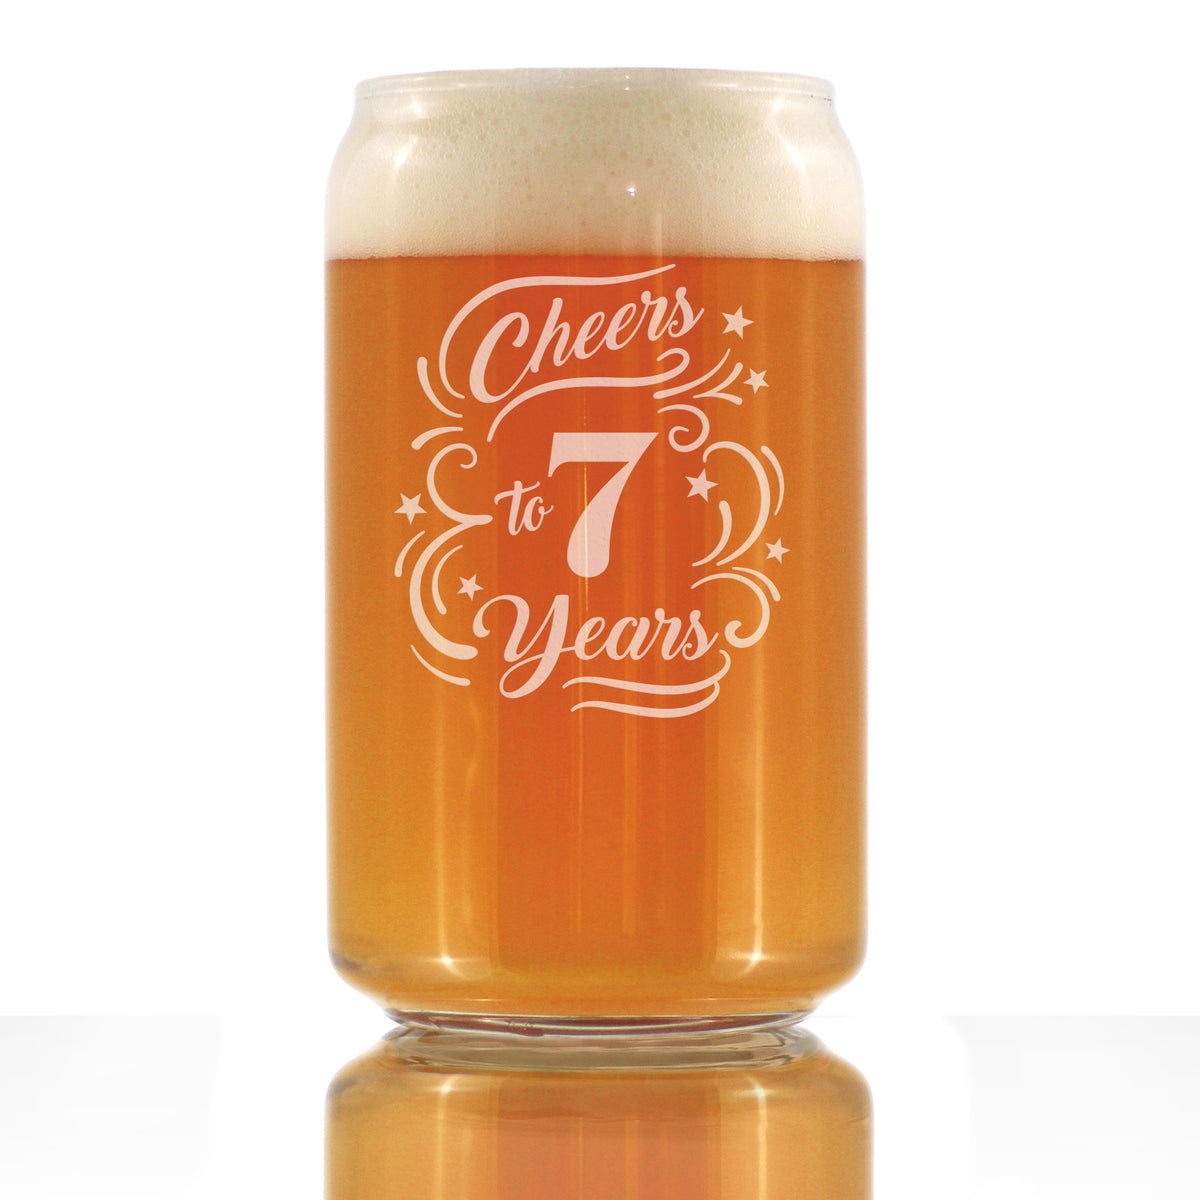 Cheers to 7 Years - Beer Can Pint Glass Gifts for Women &amp; Men - 7th Anniversary Party Decor - 16 Oz Glasses